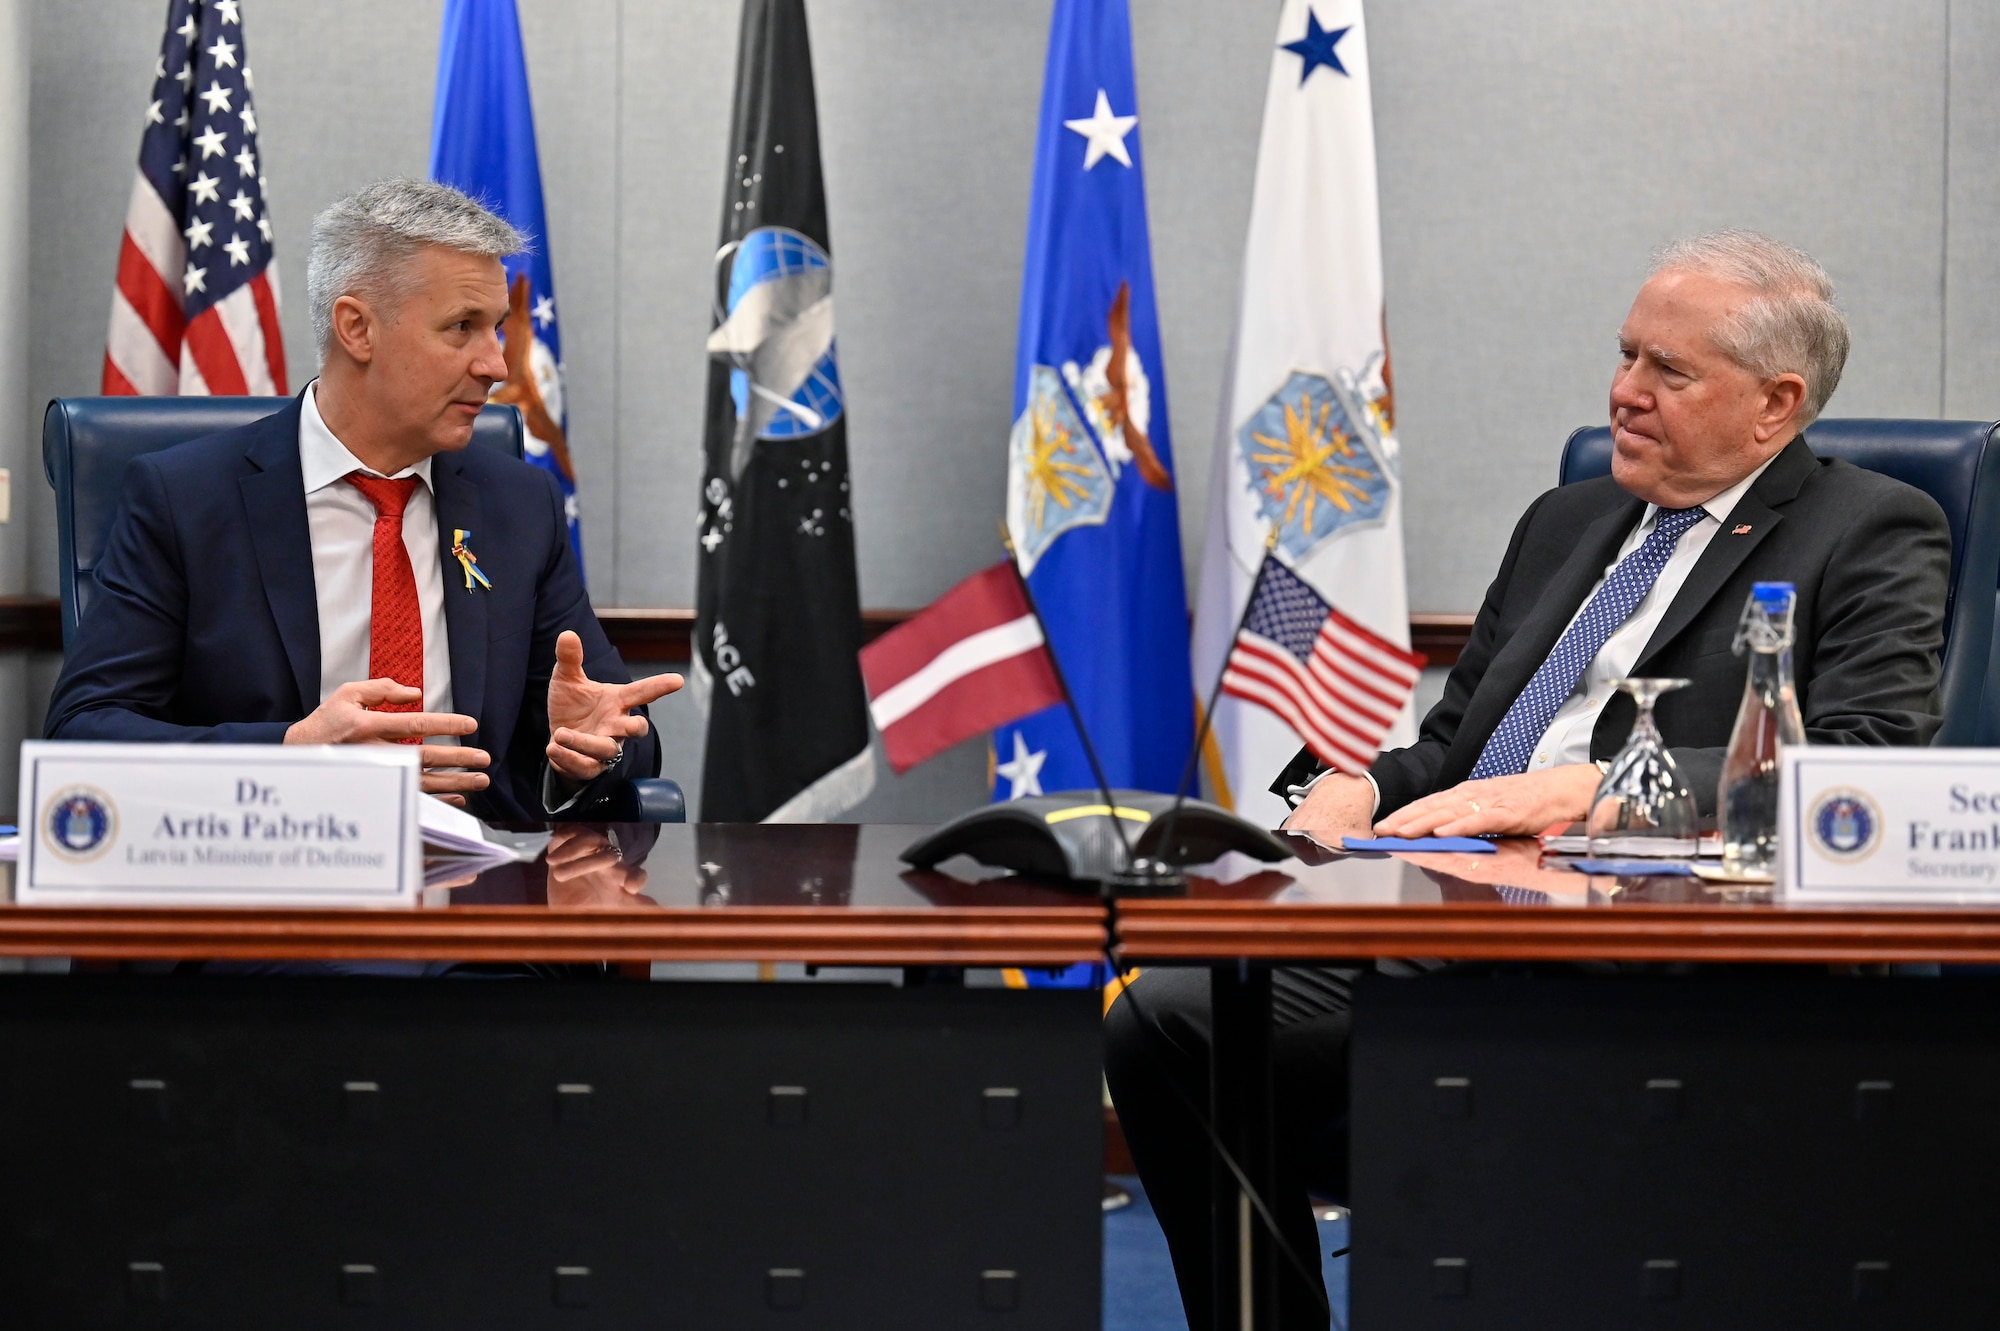 Dr. Artis Pabriks, minister of defense and deputy prime minister of Latvia, speaks with Secretary of the Air Force Frank Kendall during a meeting.